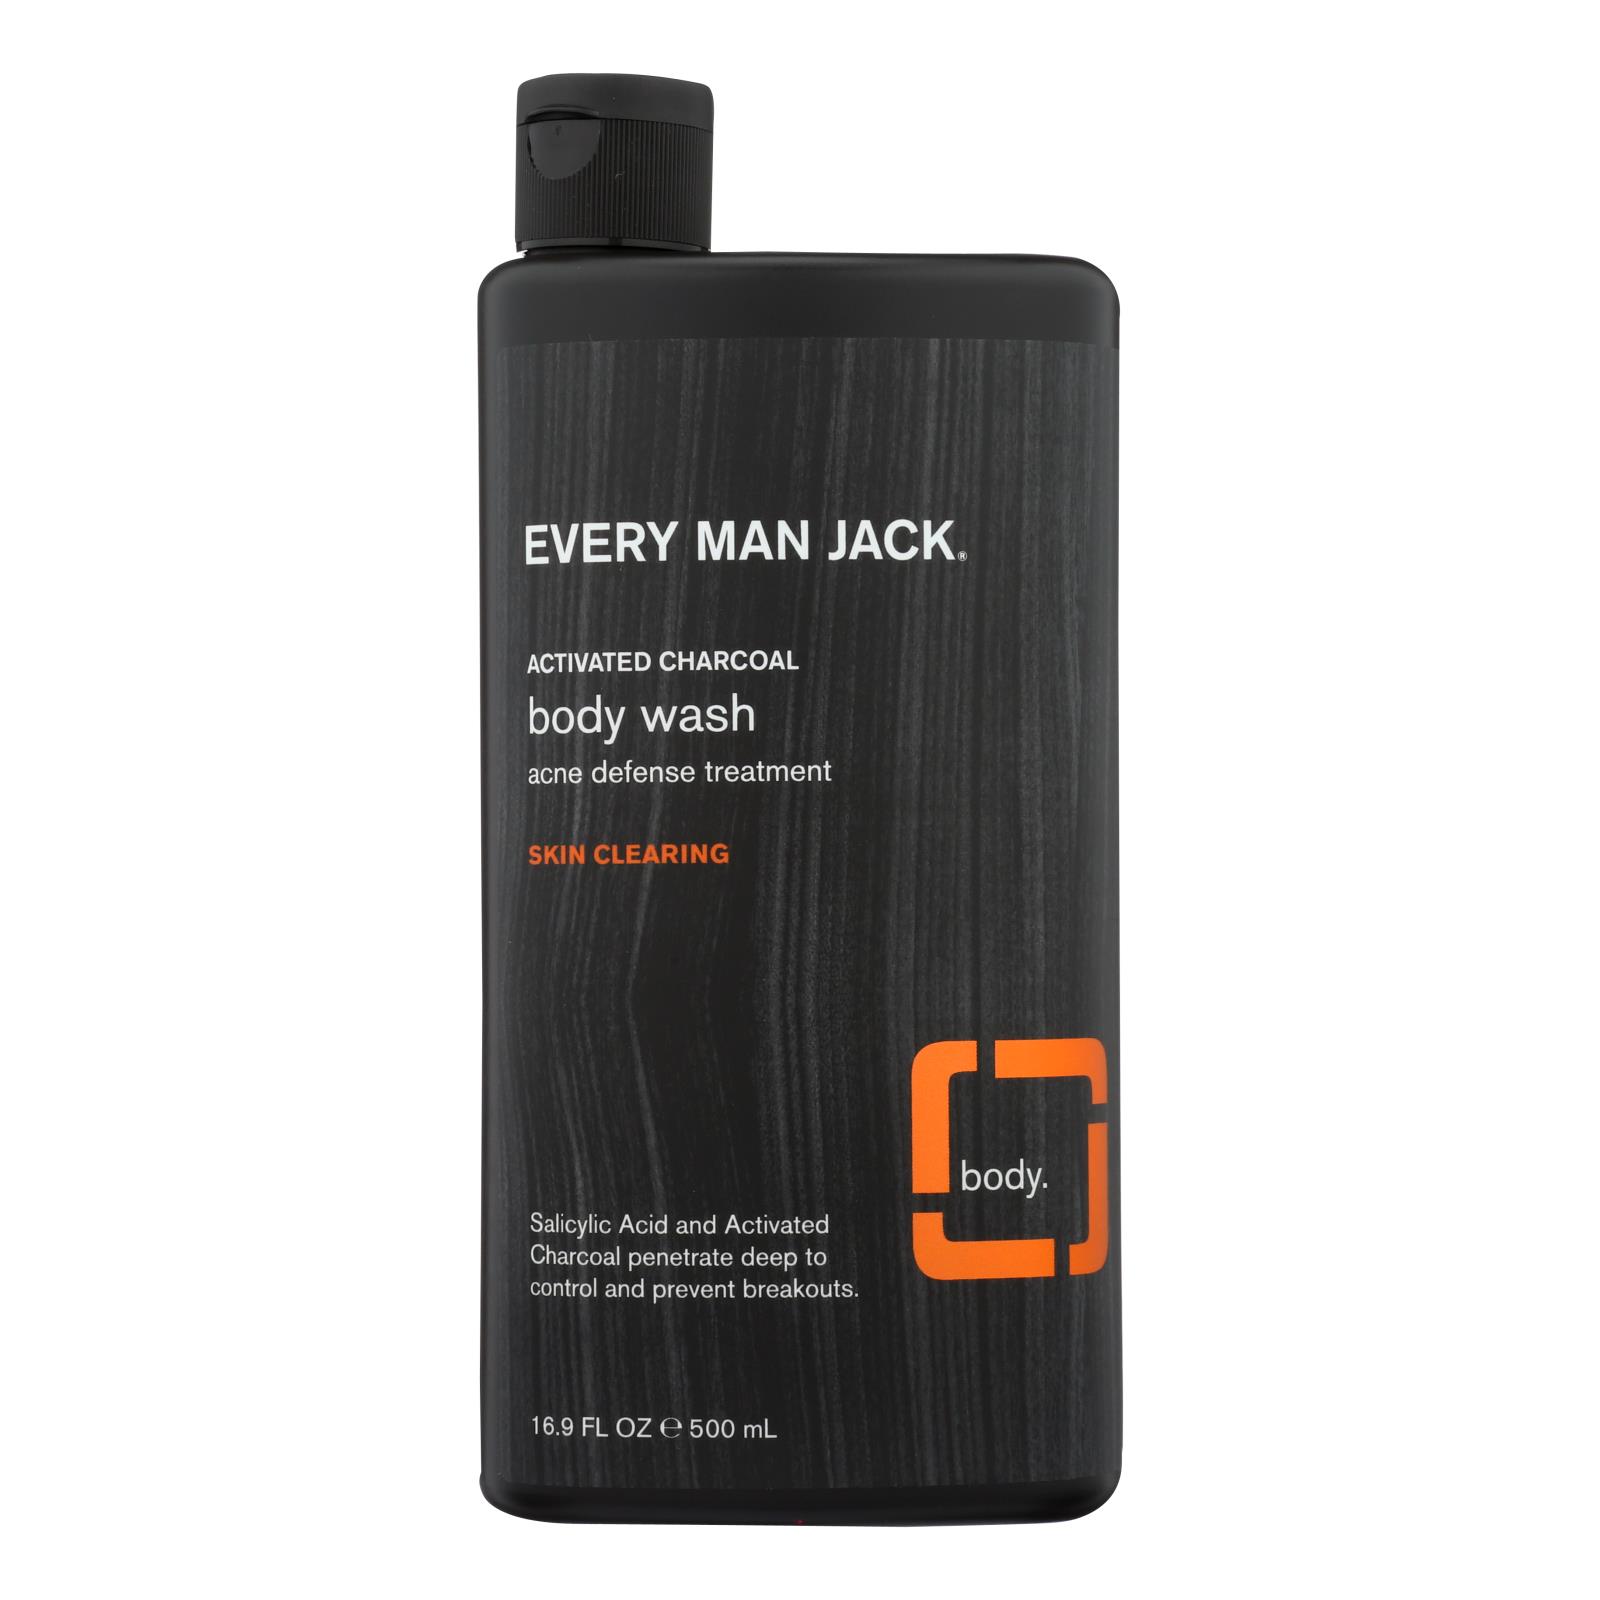 Every Man Jack Body Wash Activated Charcoal Body Wash | Skin Clearing - Case of 16.9 - 16.9 fl oz.